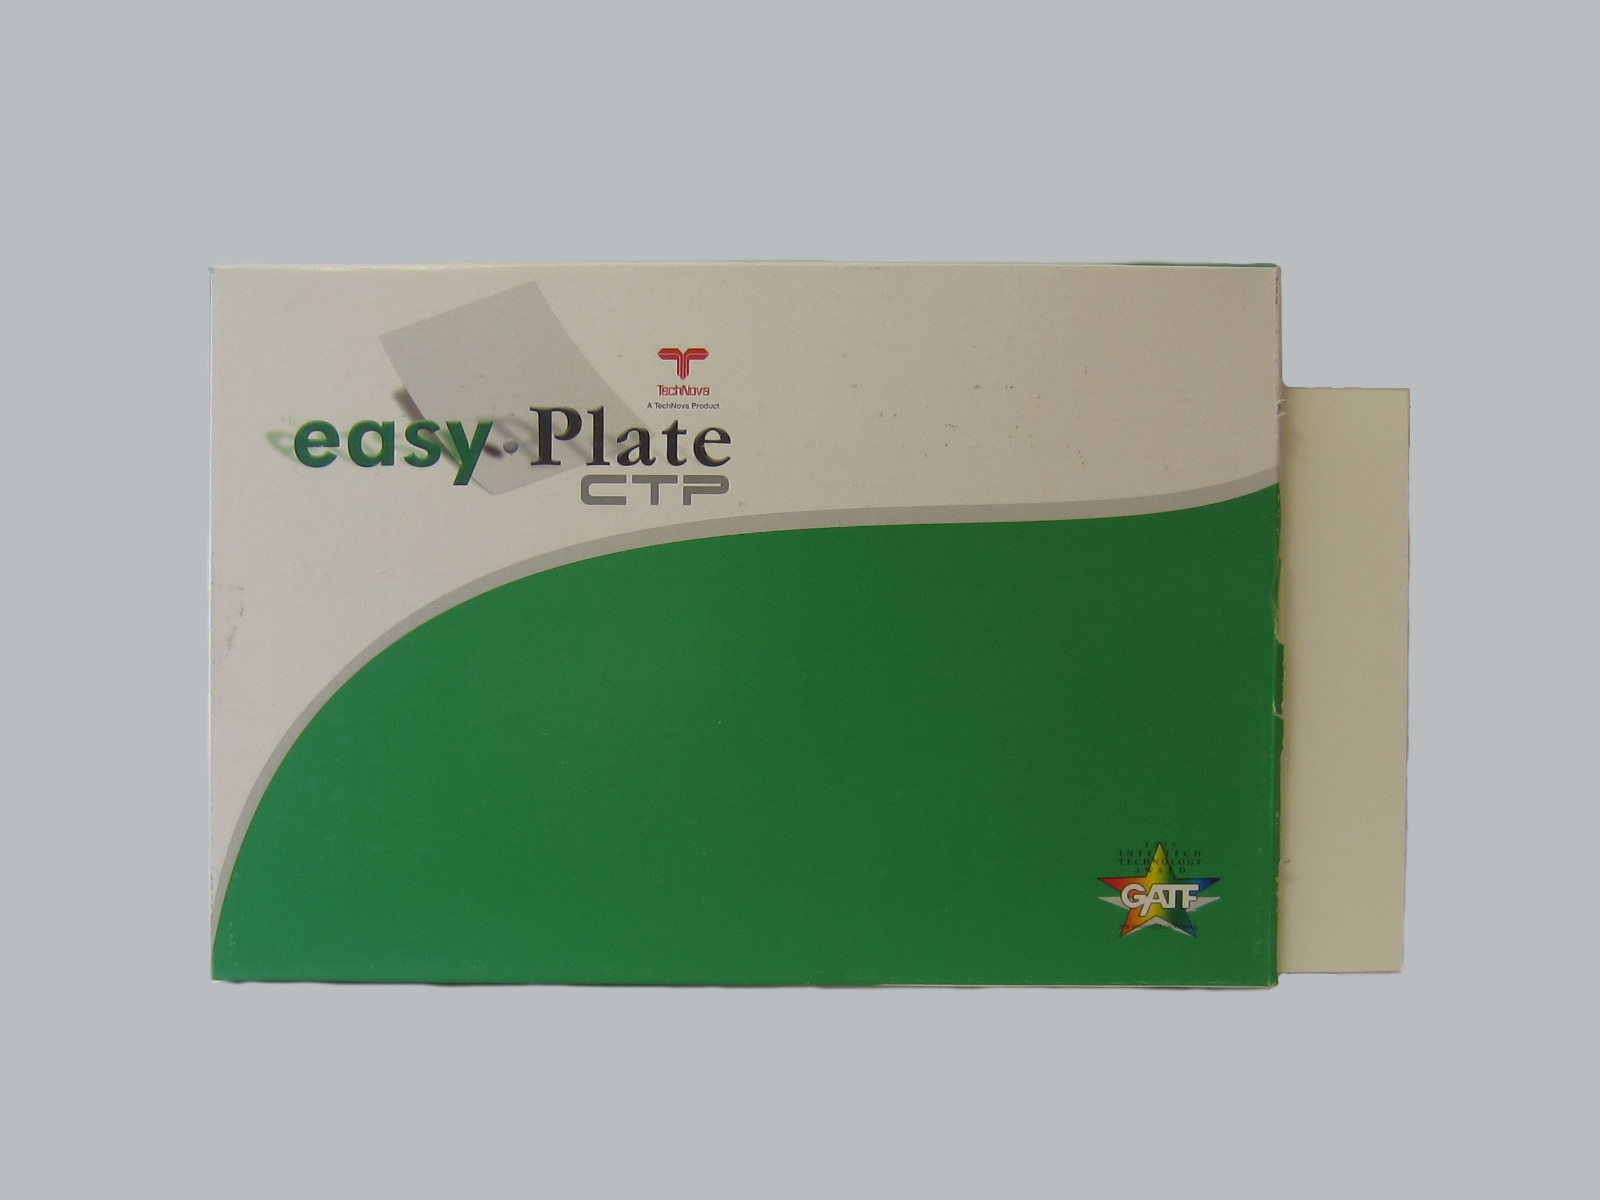 PLACA POLYESTER 11 X 18 EASY PLATE PLVD0002                 